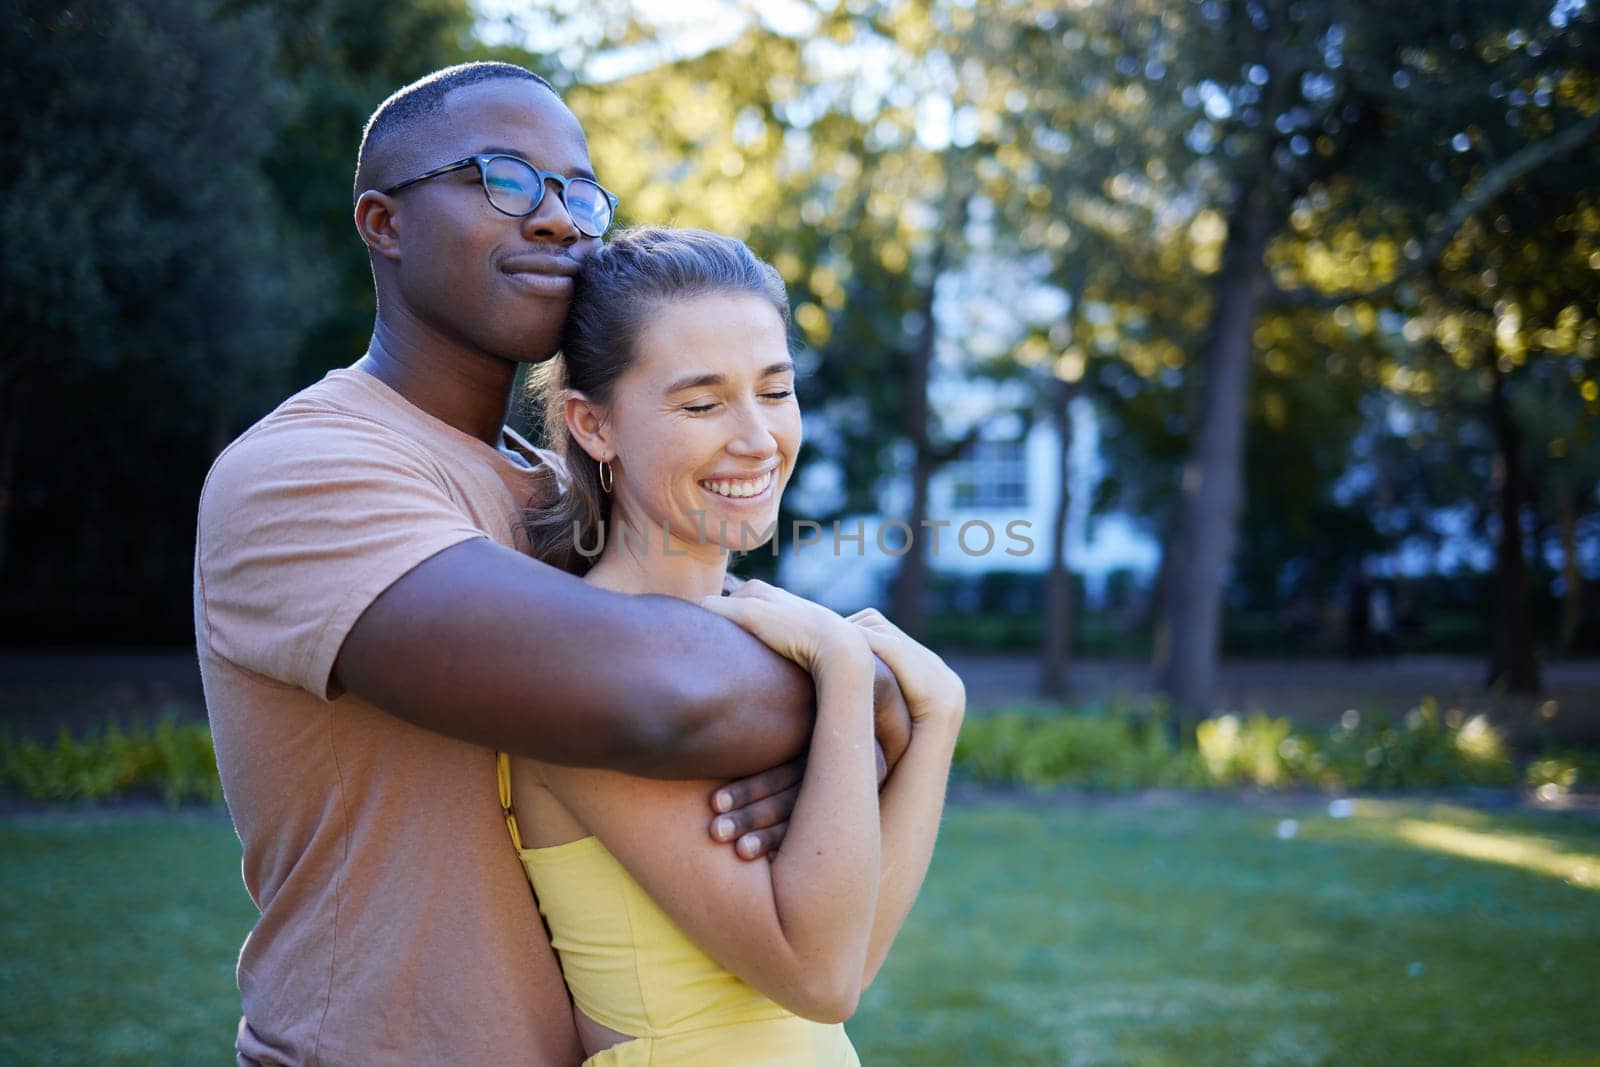 Summer, love and mockup with an interracial couple bonding outdoor together in a park or garden. Nature, diversity and romance with a man and woman hugging while on a date outside in the countryside.